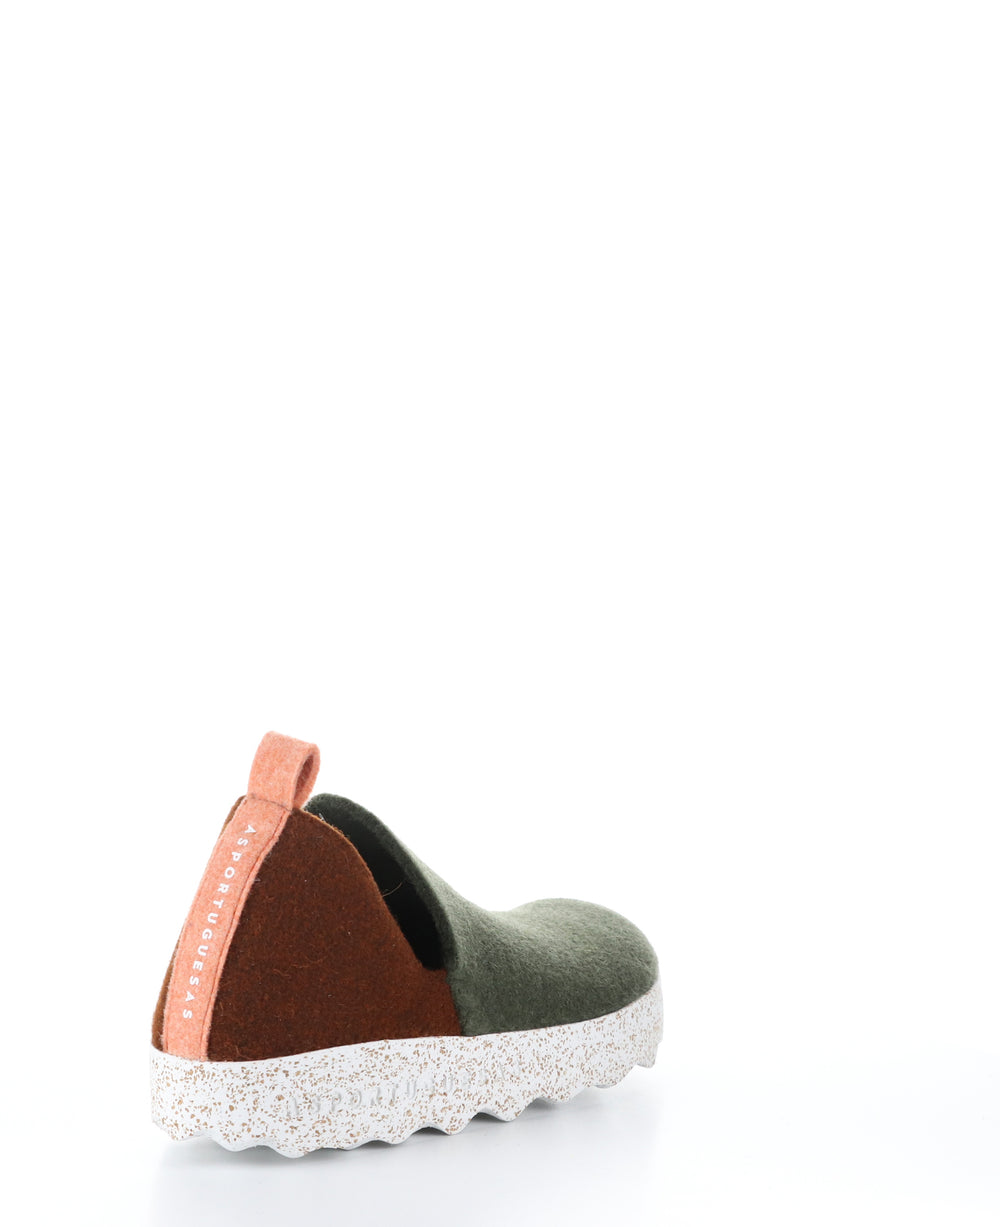 CITY086ASP Mil Grn/Brn/Tang Round Toe Shoes|CITY086ASP Chaussures à Bout Rond in Vert